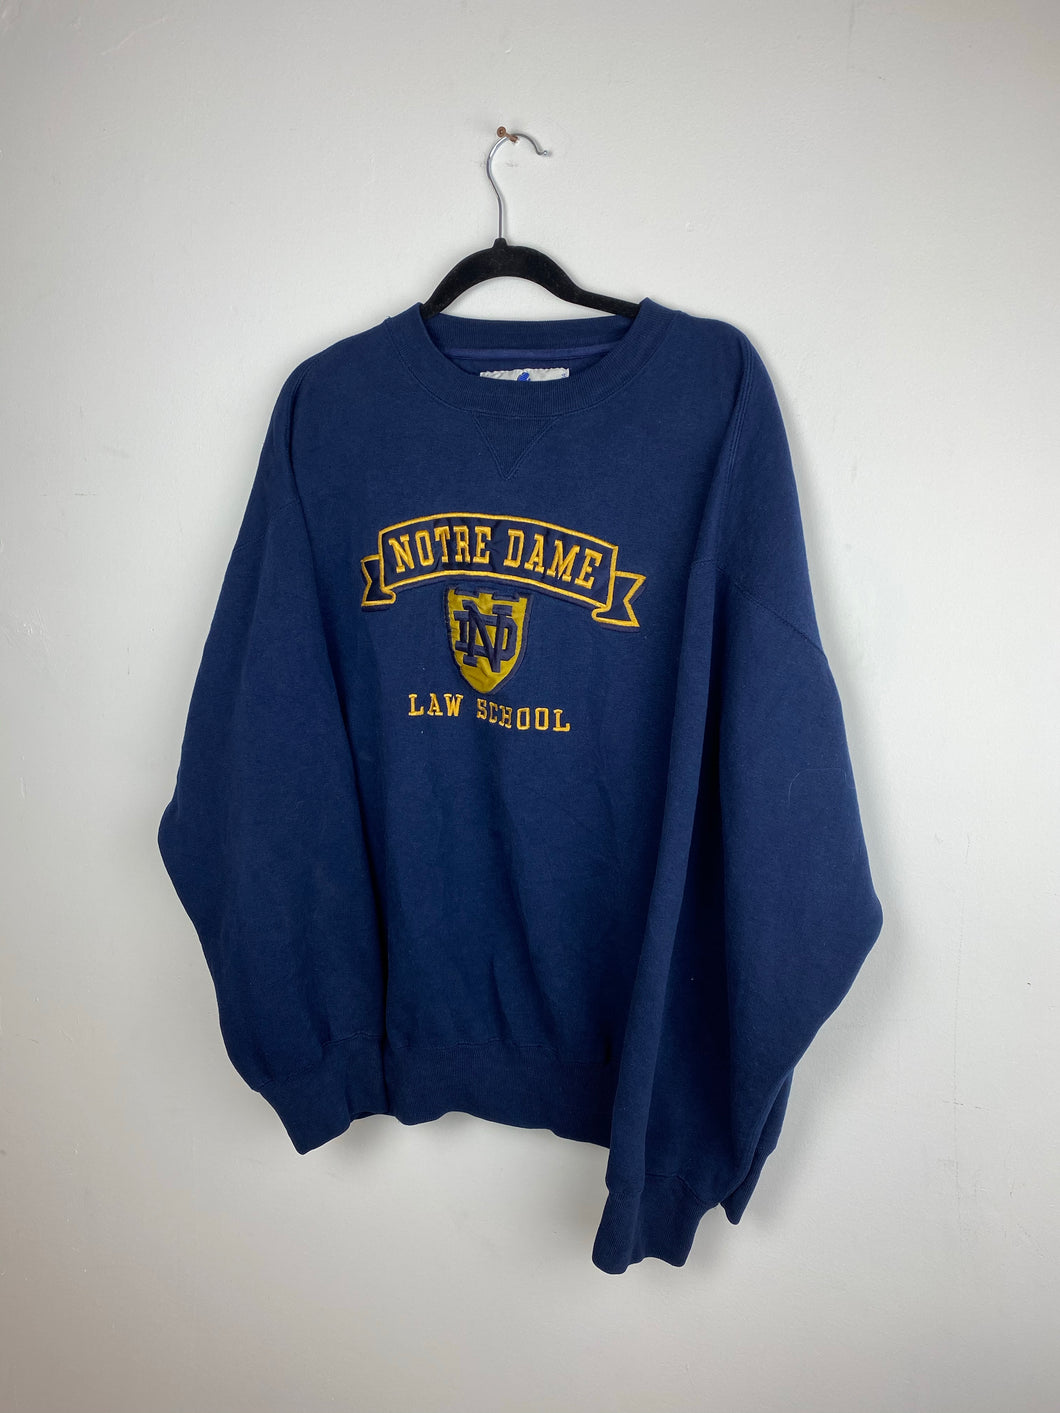 90s embroidered Notre Dame crewneck